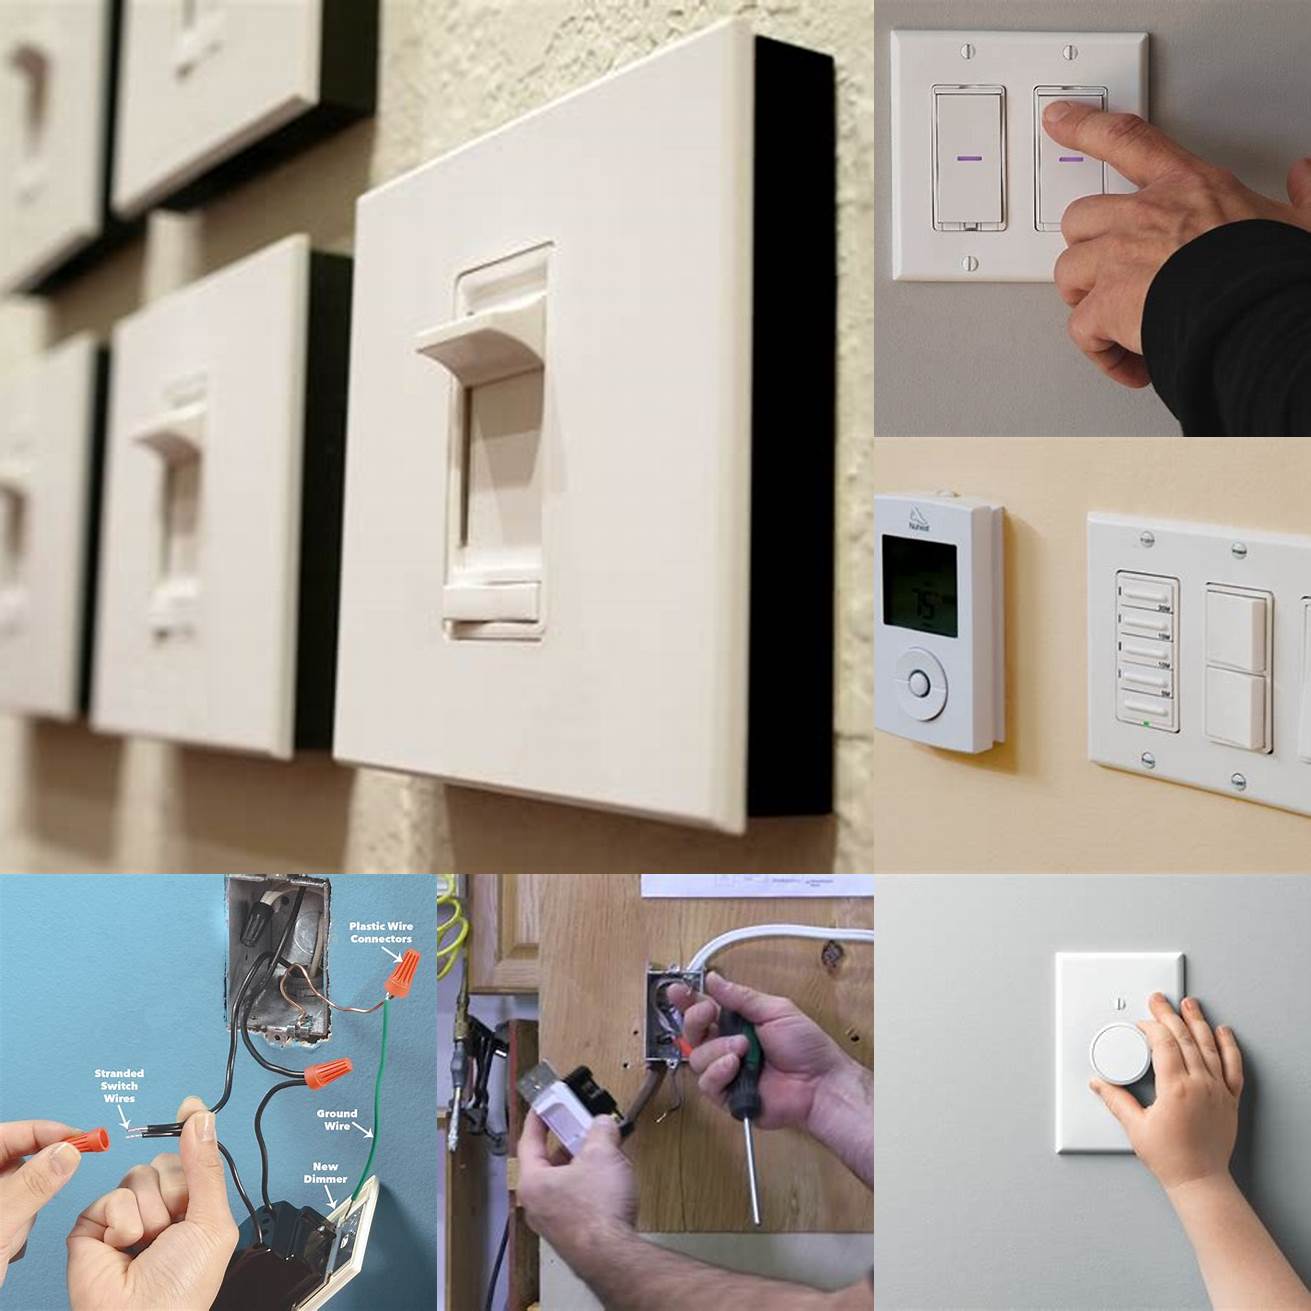 Install dimmer switches to create a cozy and relaxing atmosphere in your bathroom